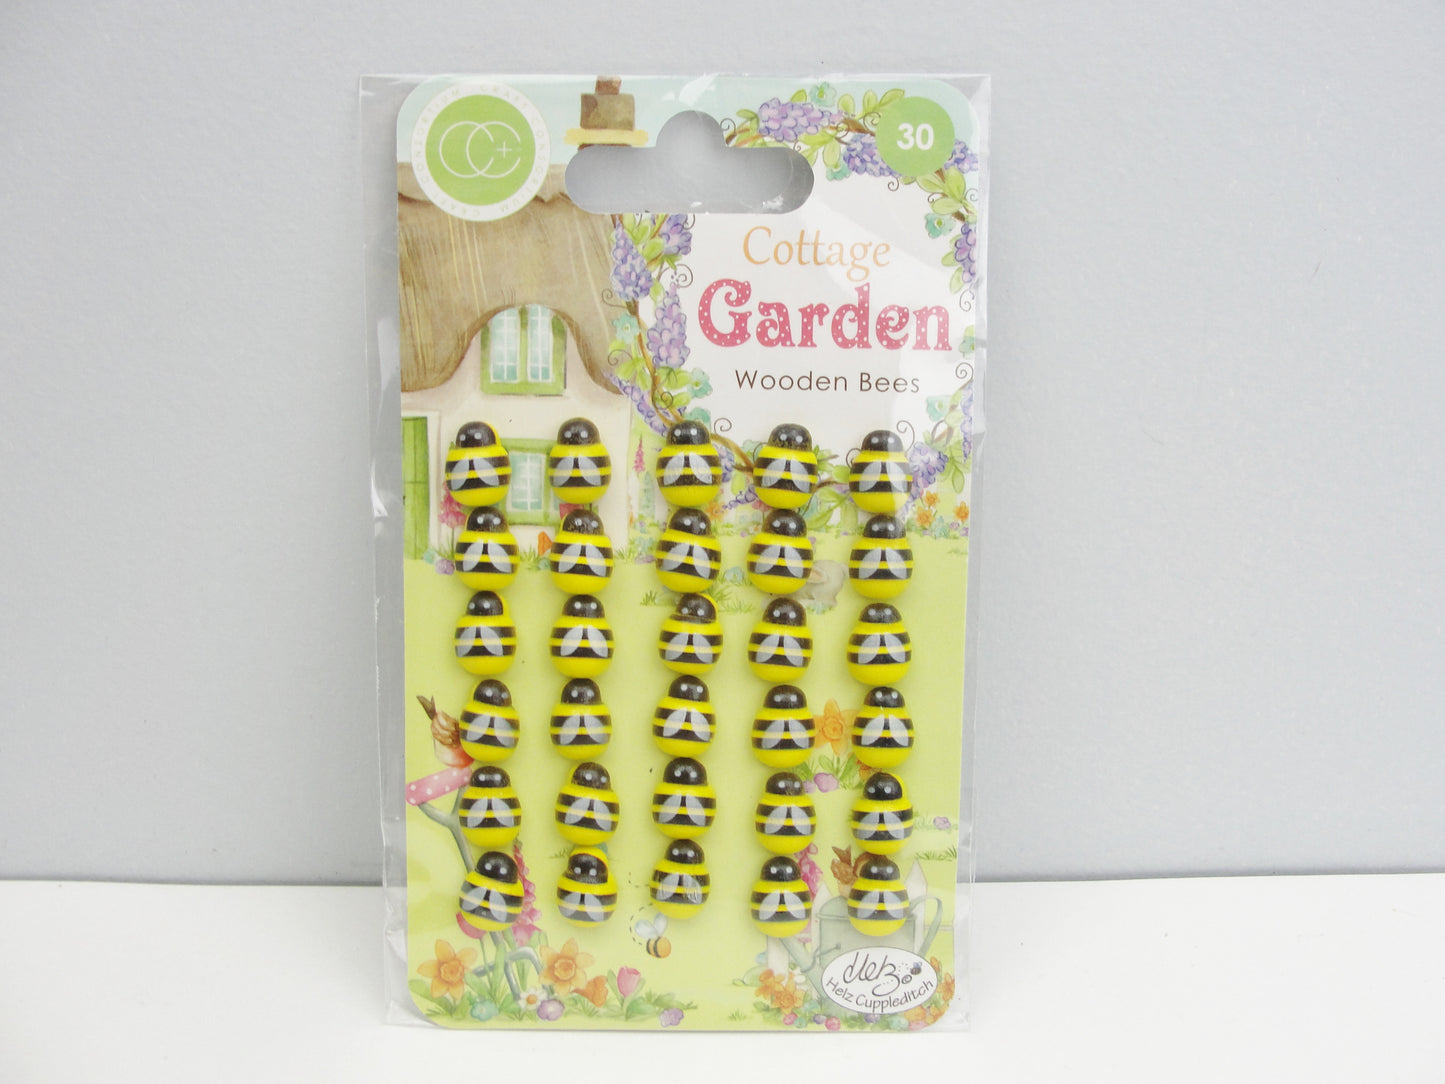 Mini wooden bees pack of 30 pieces